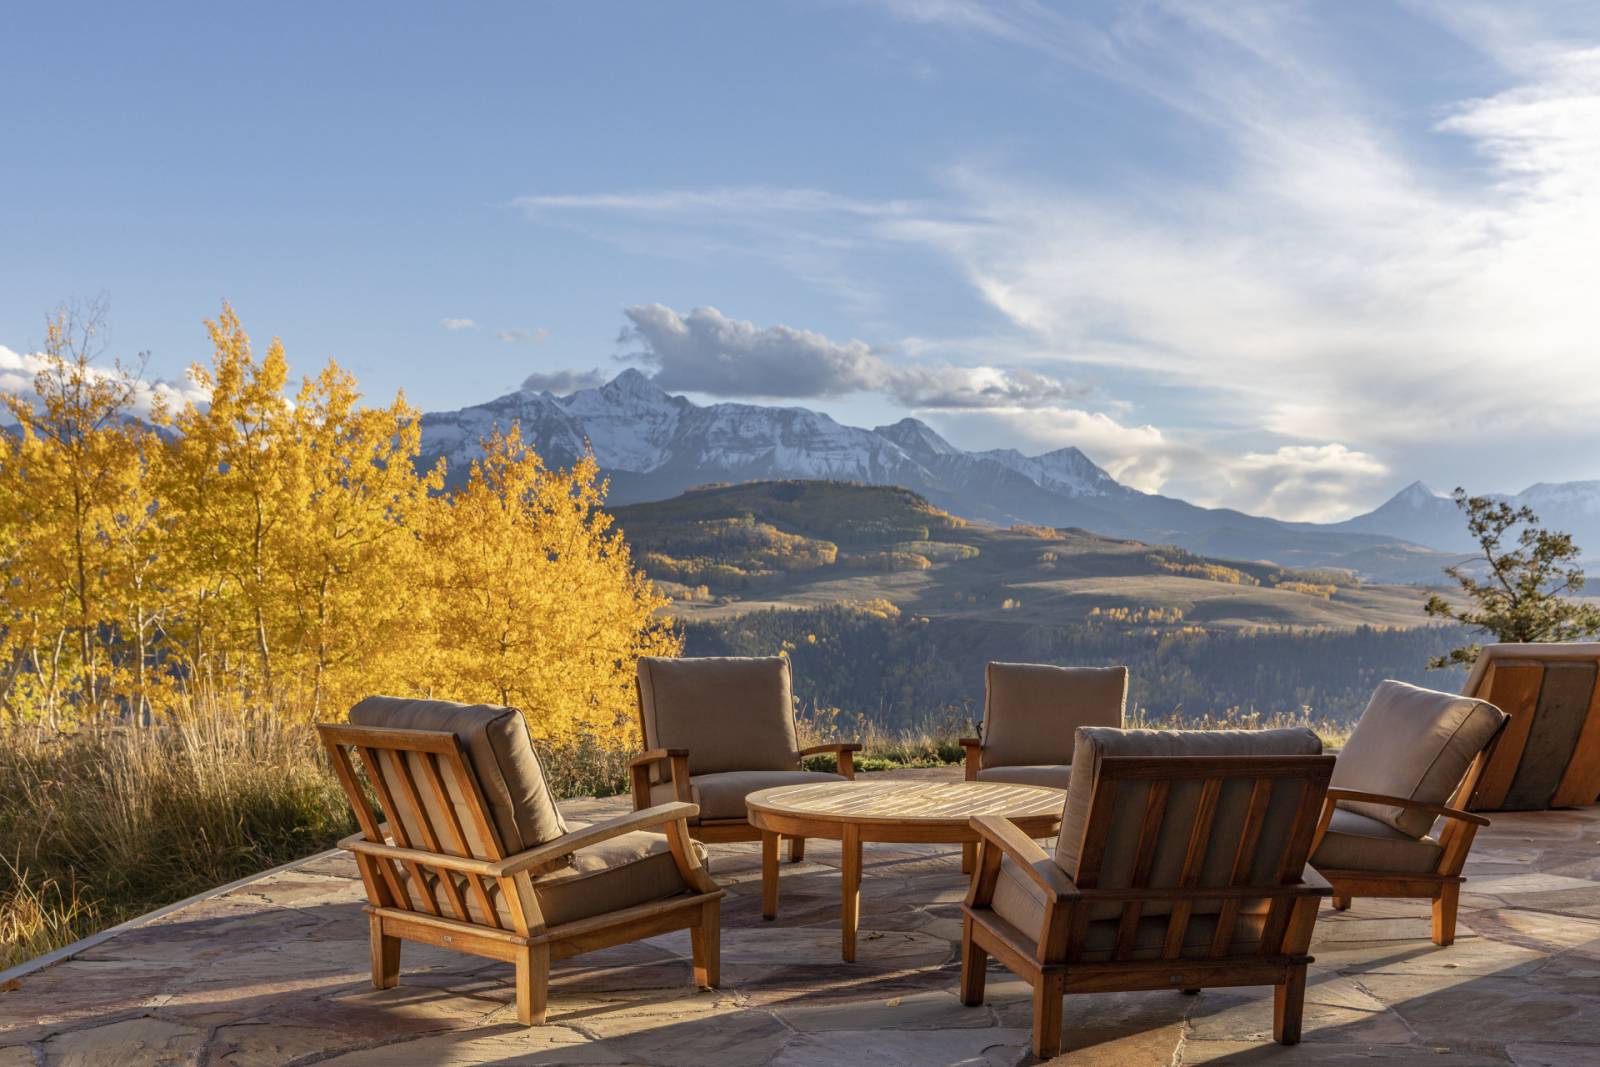 Telluride Vacation Rentals, PaGomo* - Provides a luxurious stay in Telluride, Colorado, for you, your family, a corporate retreat, intimate wedding or just the perfect escape for the nature enthusiast.